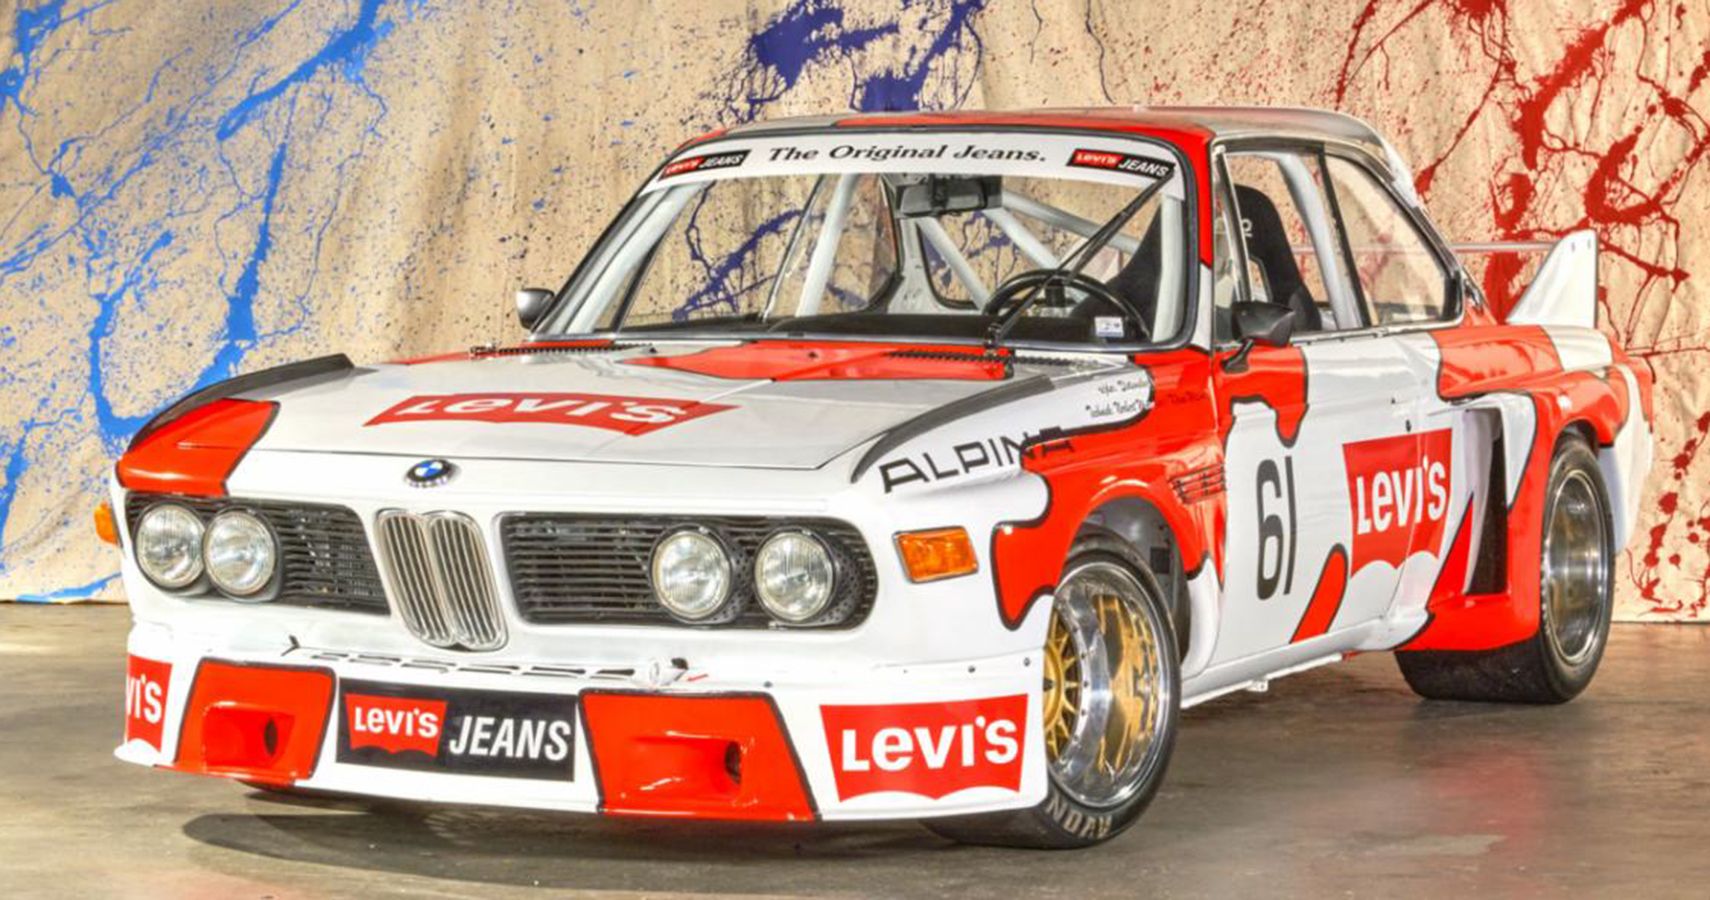 BMW 3.0 CSL No. 2211352 is first CSL entered in race